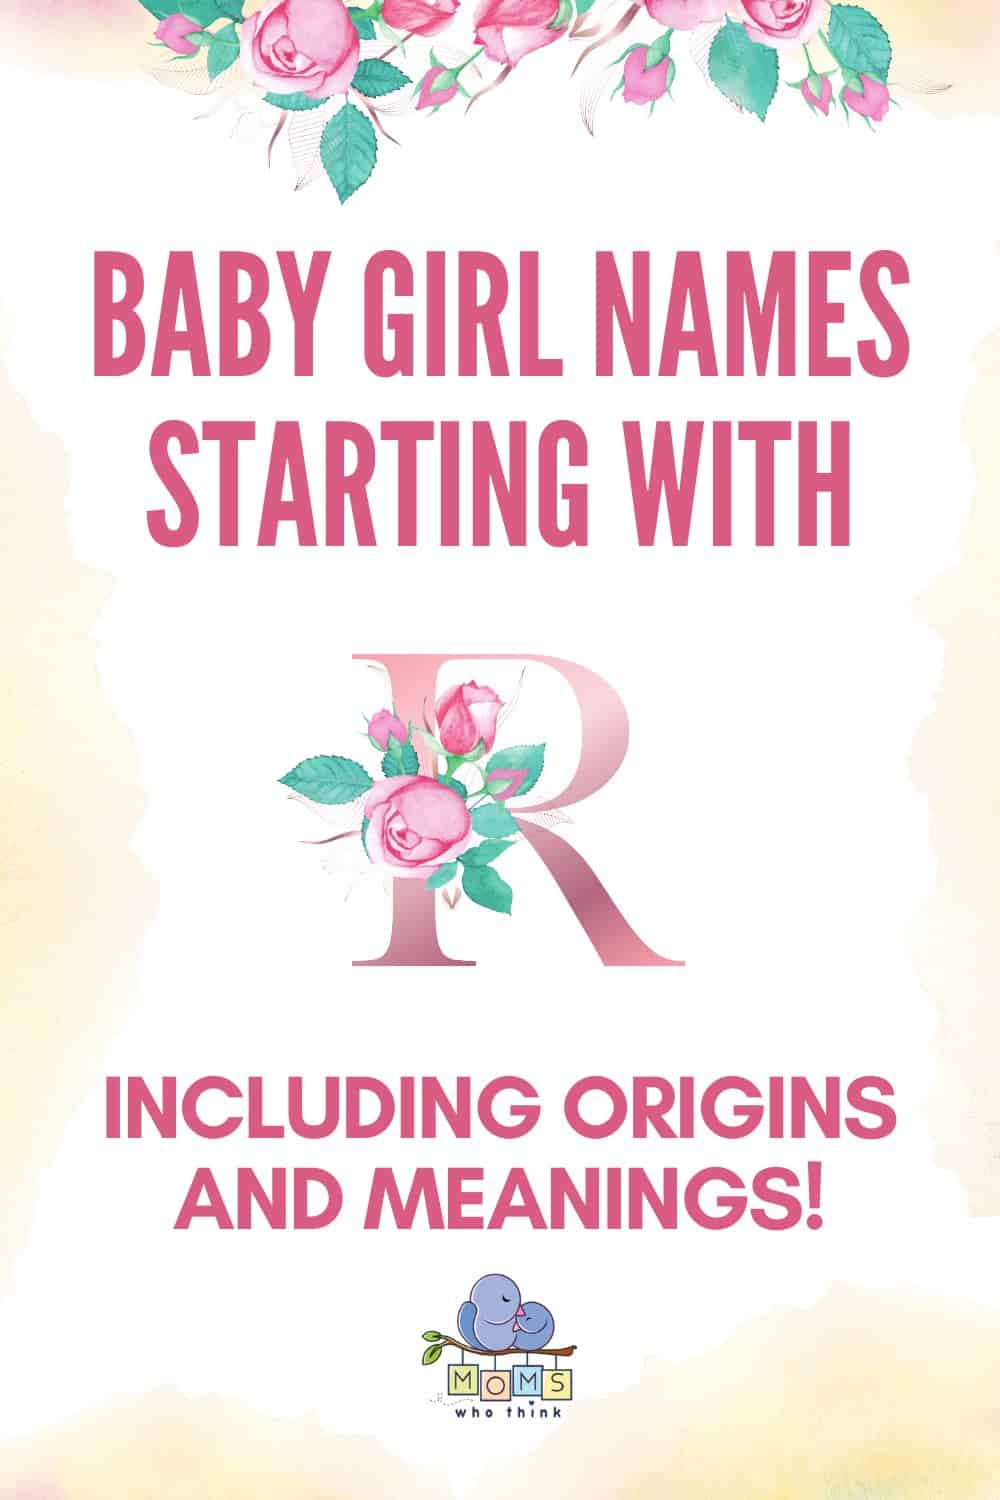 Baby girl names starting with R